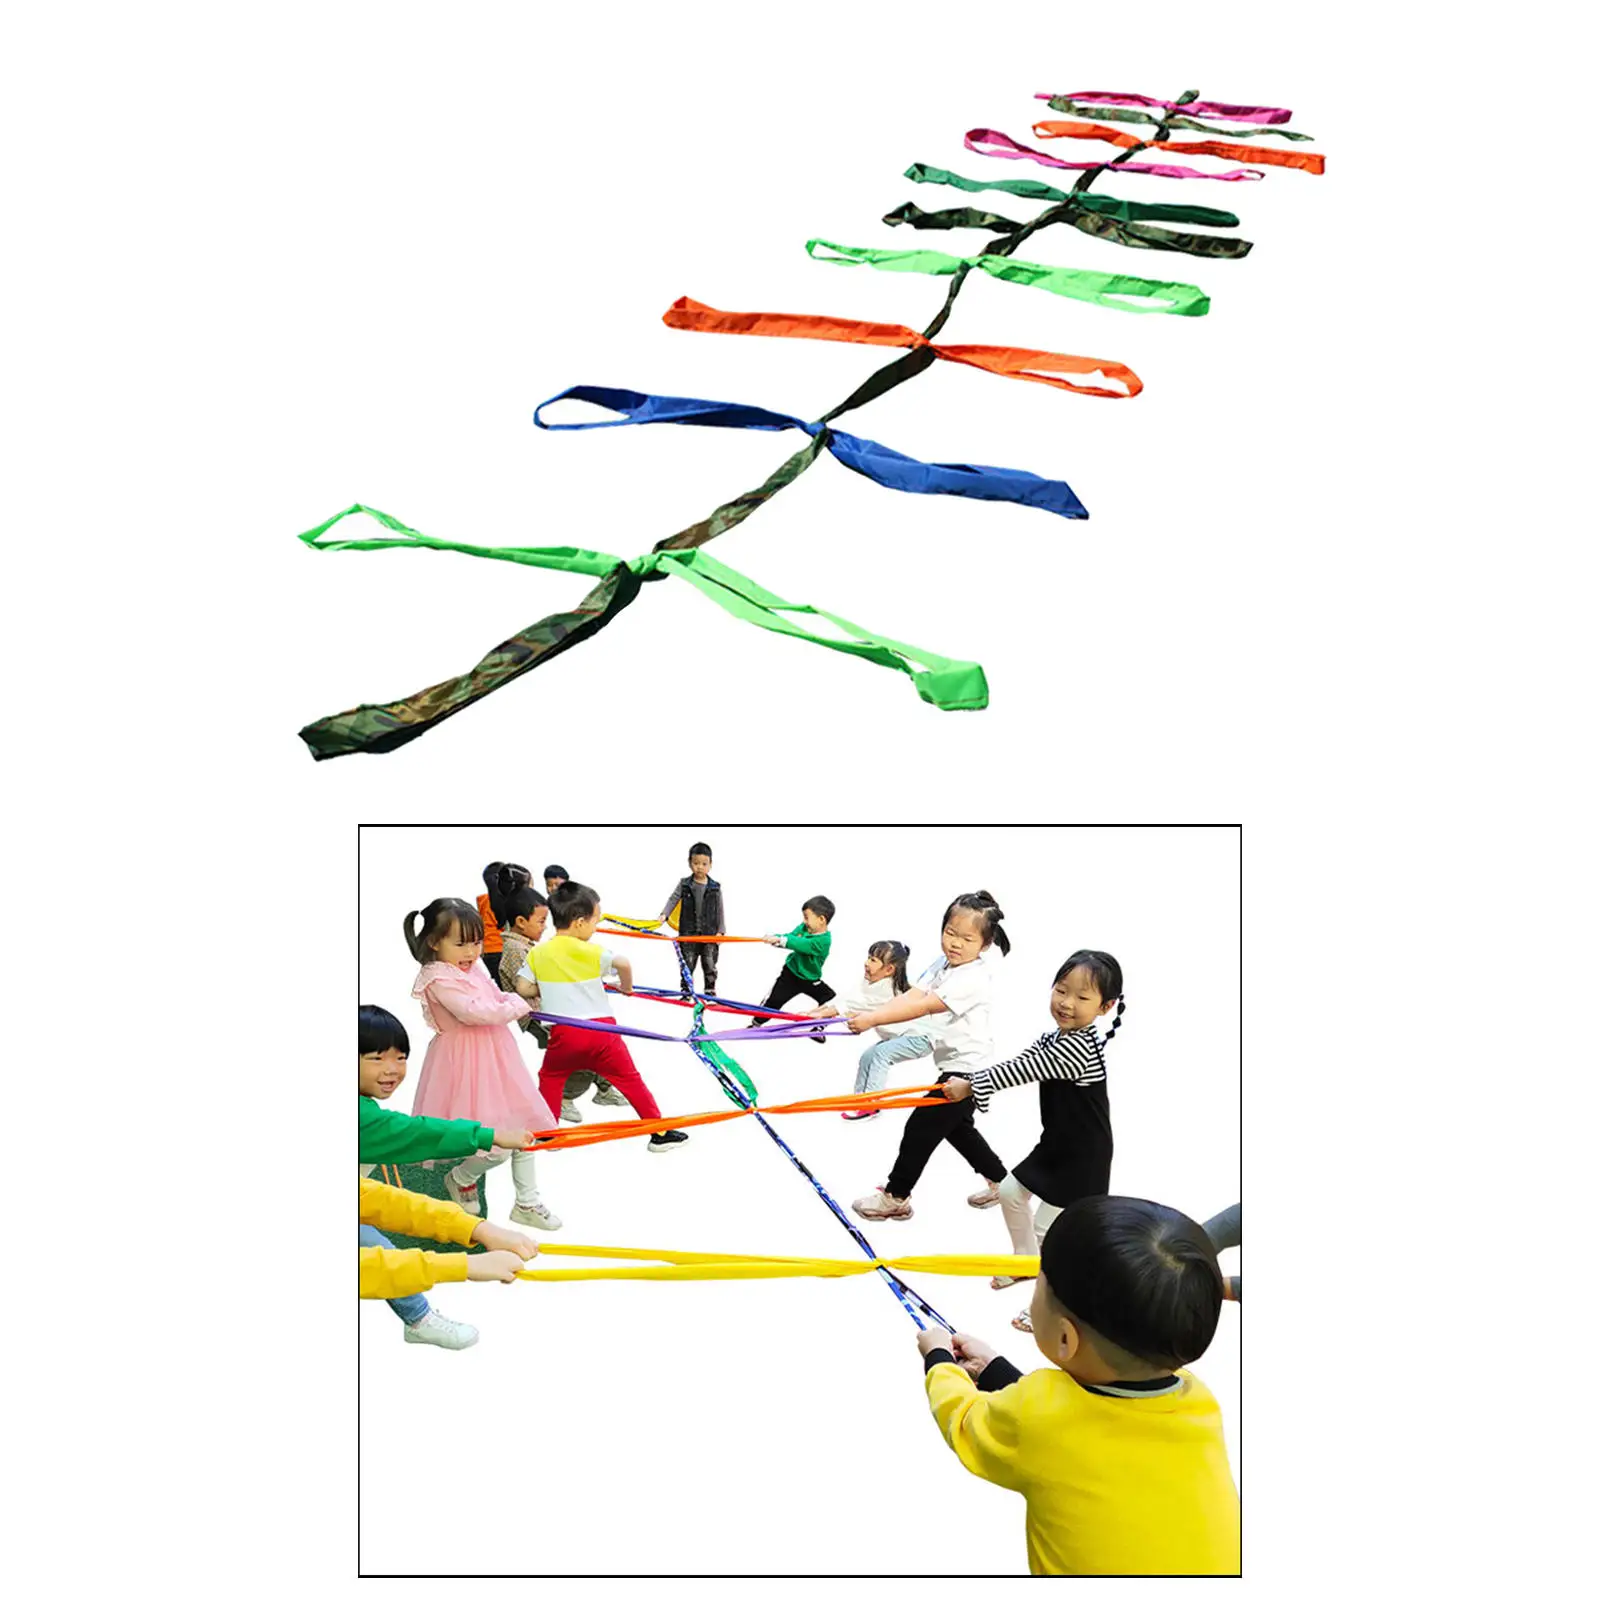 Tug of War Rope Team Building Group Play Yard Game for Teachers Kids Toddler